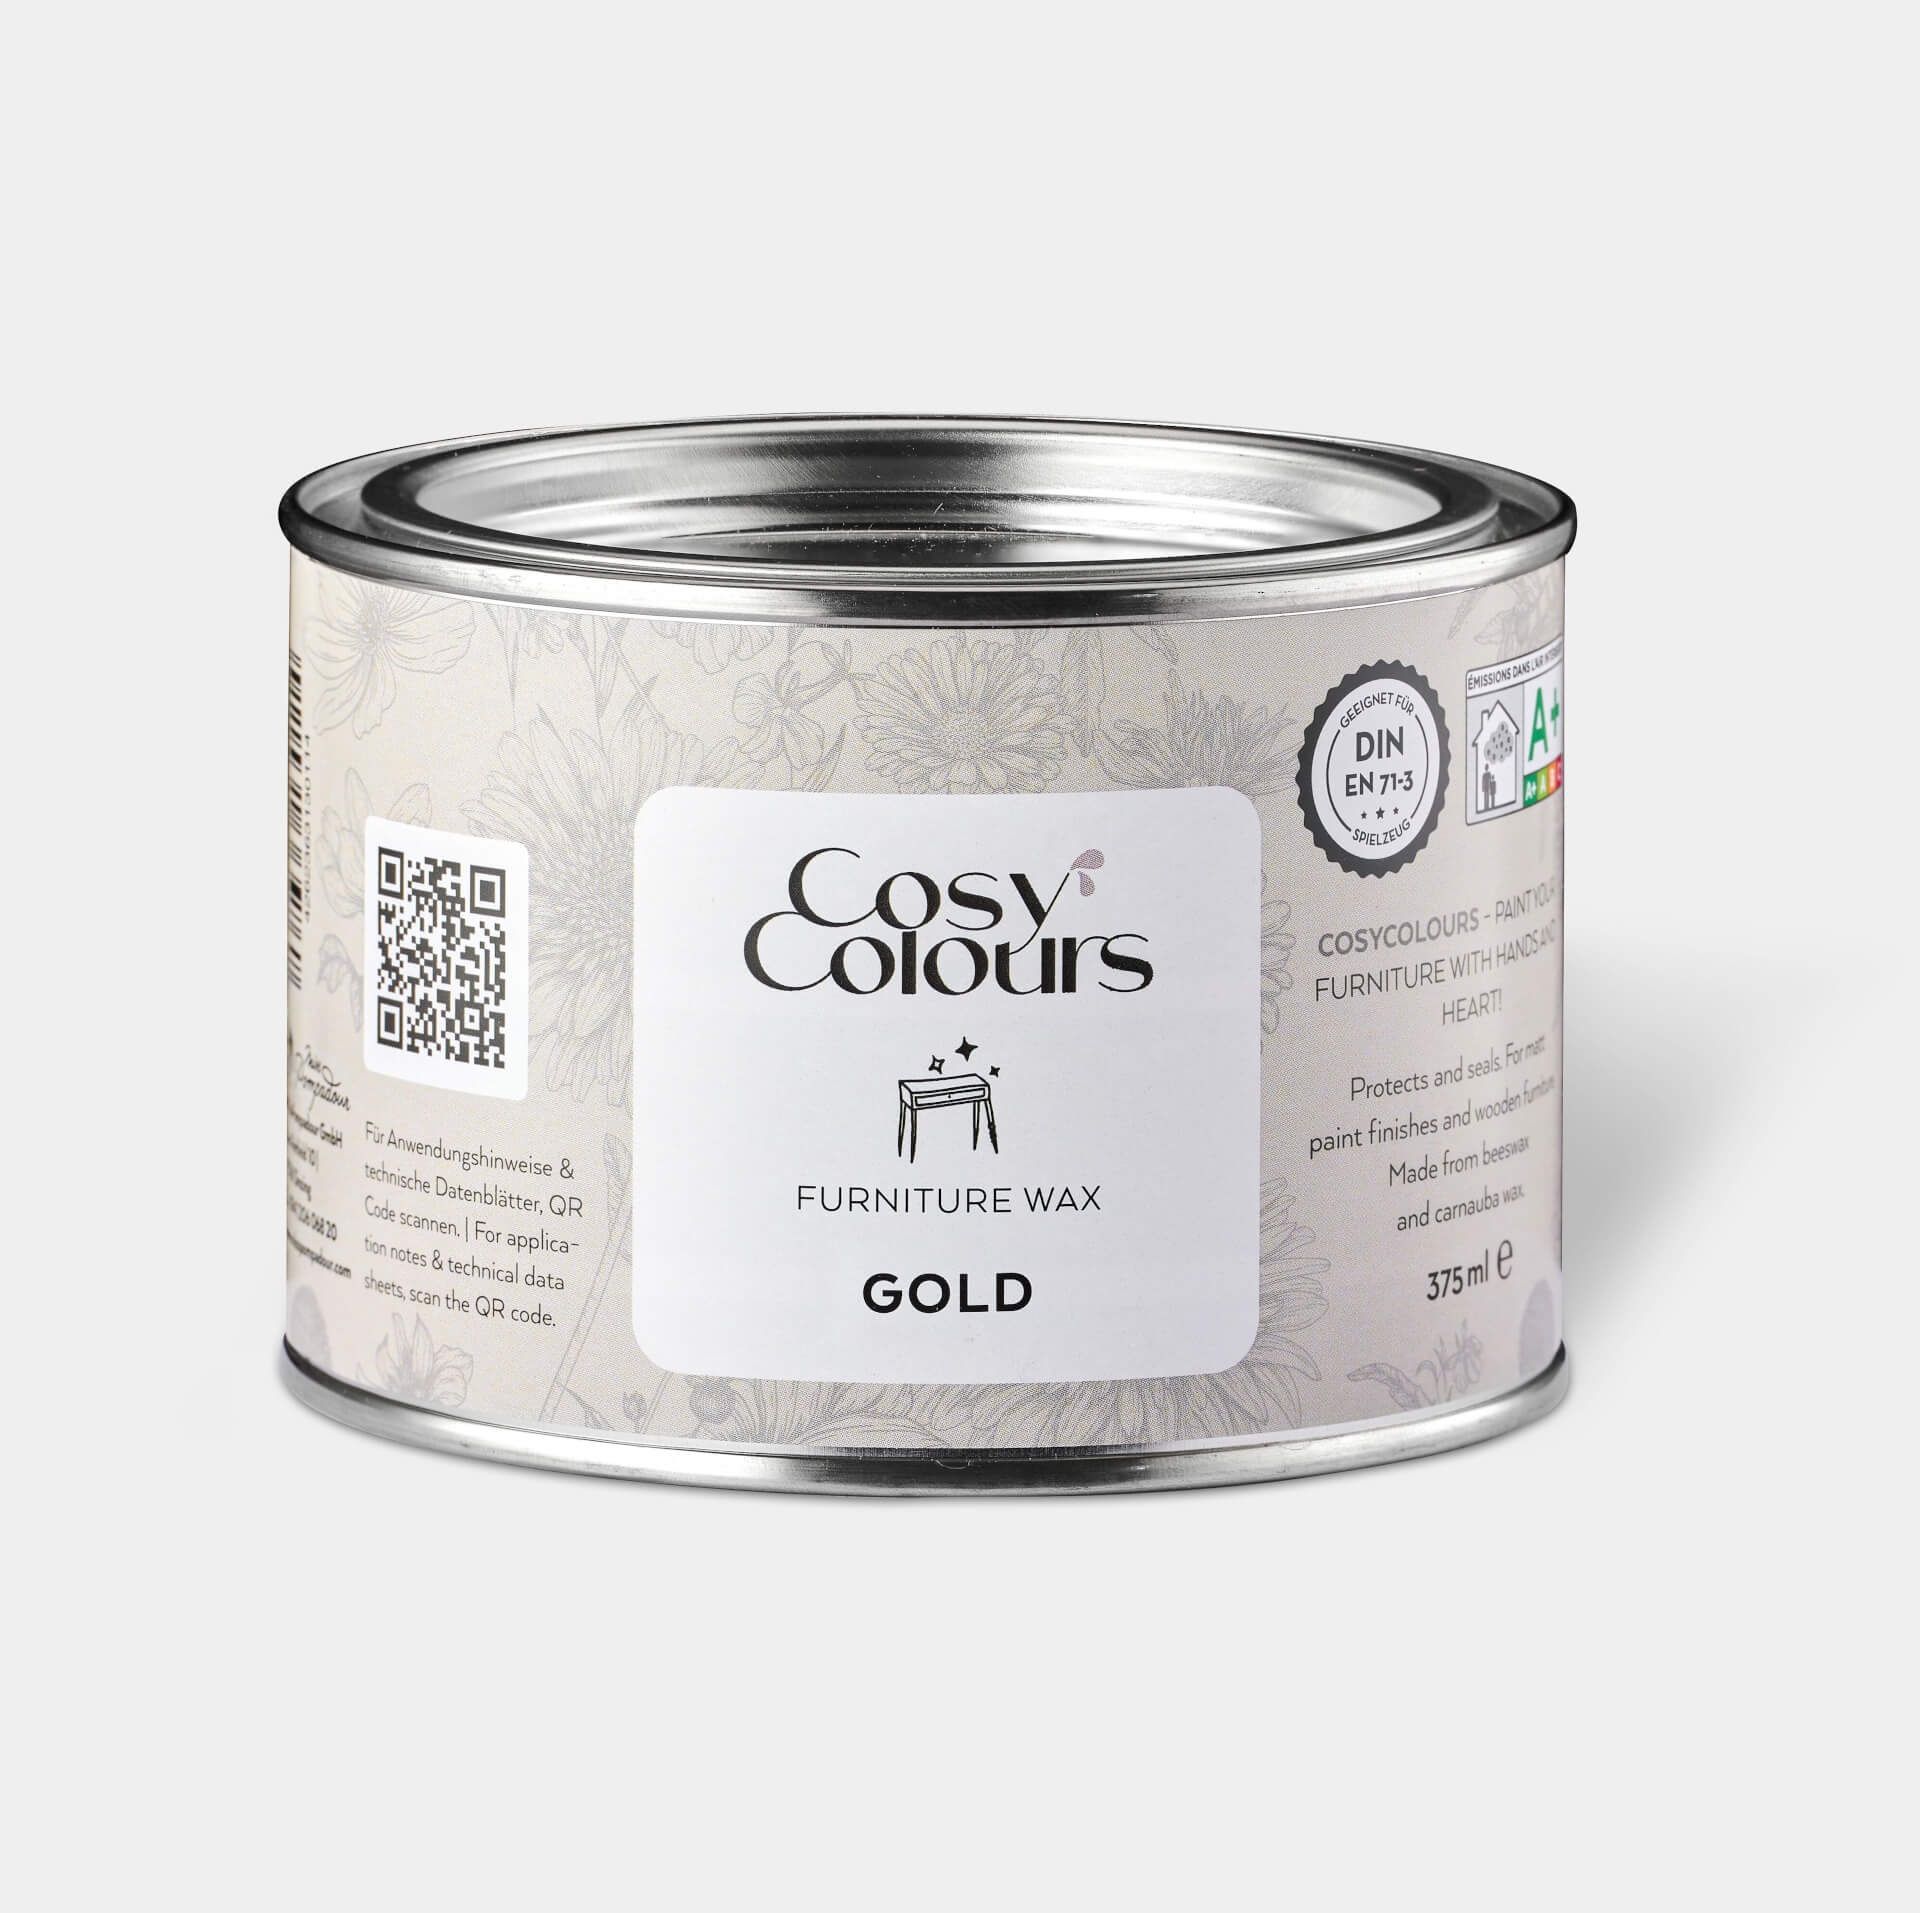 CosyColours Furniture Wax Gold